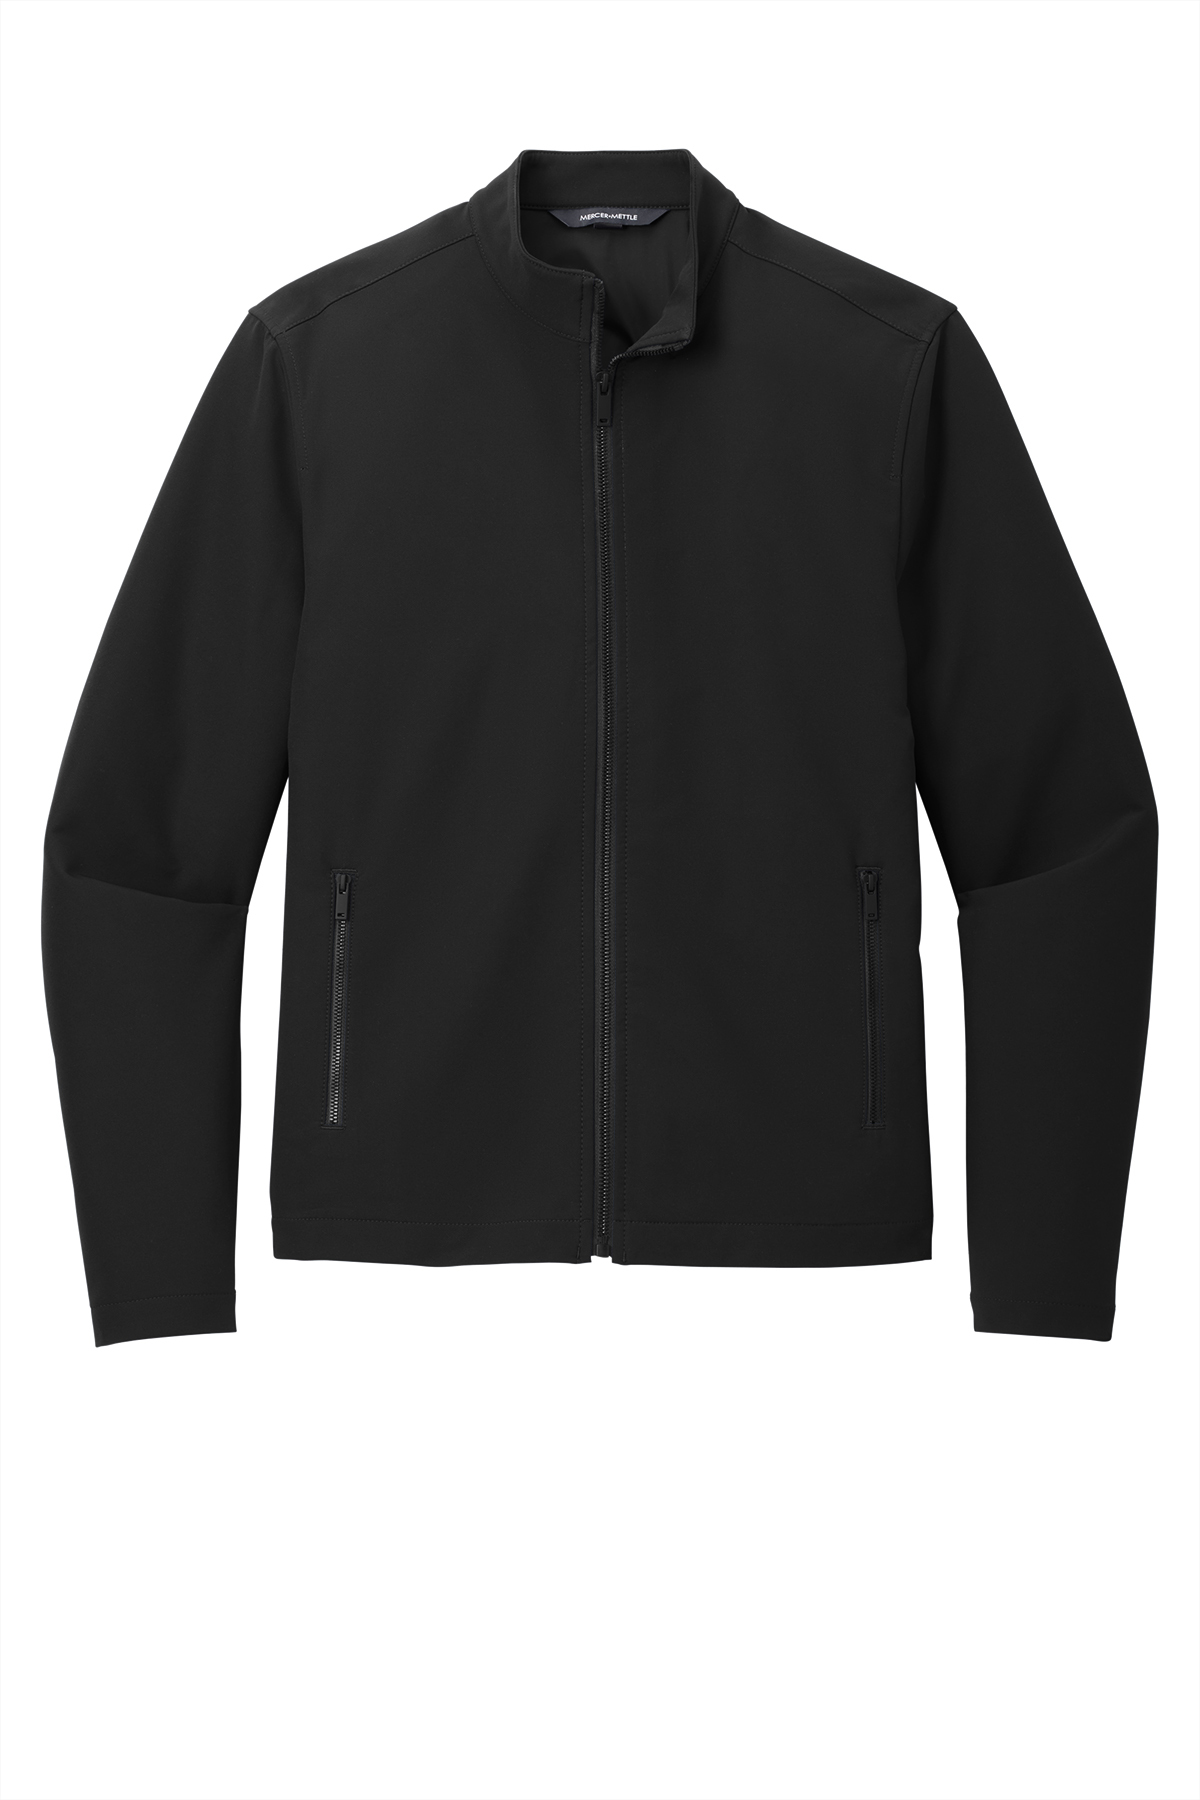 Mercer+Mettle Stretch Soft Shell Jacket | Product | SanMar